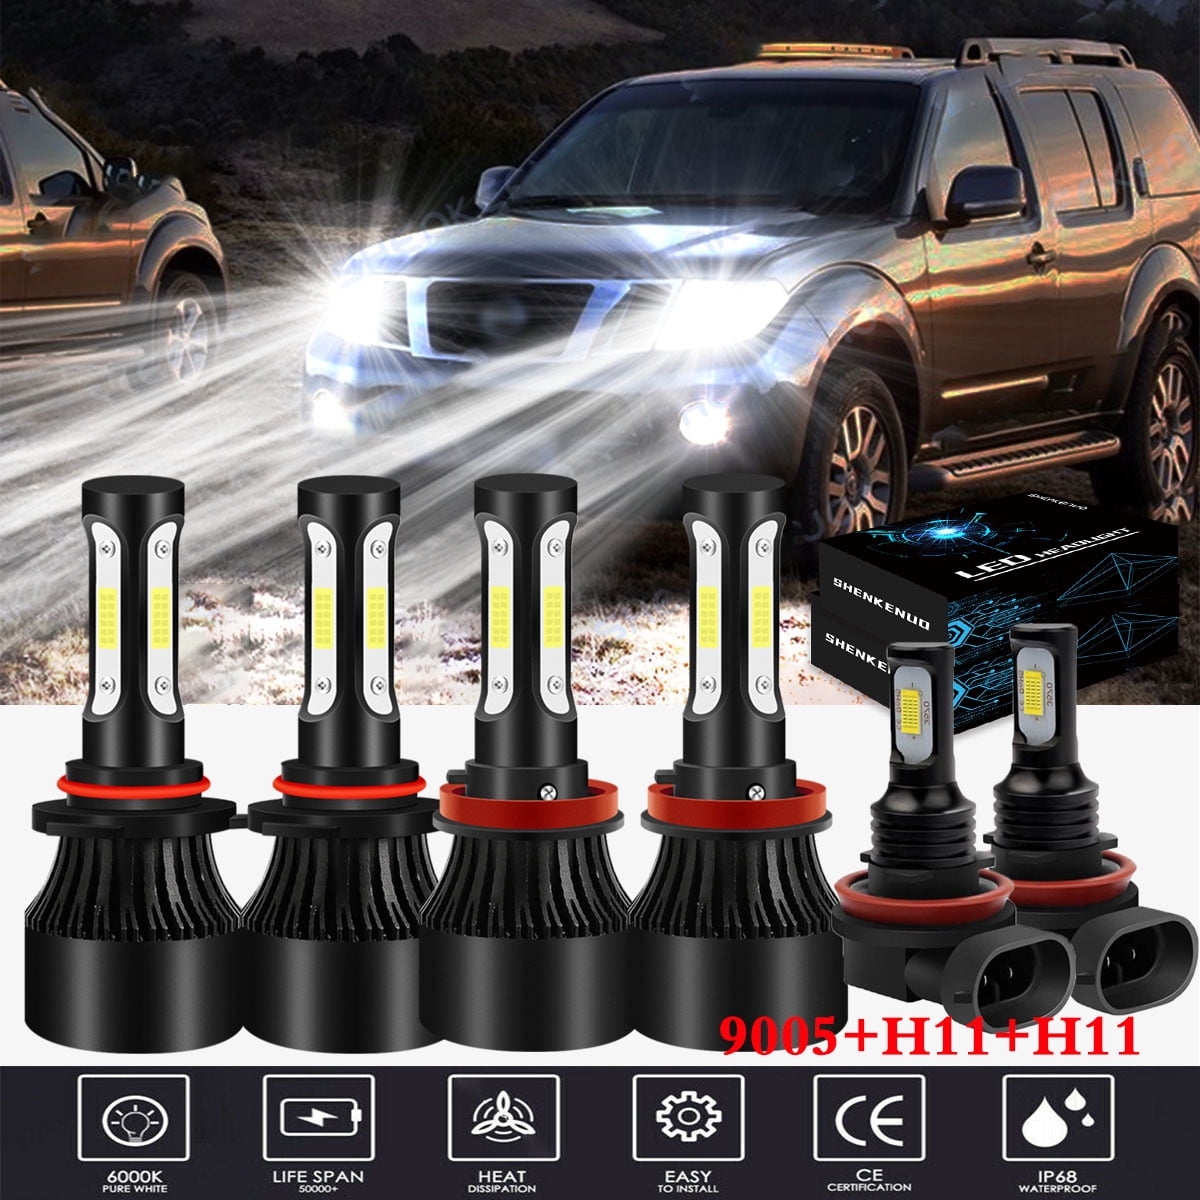 US Stock LED Headlight Bulbs 9005 9006 Combo Kit 24000LM Total 6000K White High Low Beam 4-Side Chips 360 Degree for Cars Automotive Headlamp 2 Year Warranty 4PCS